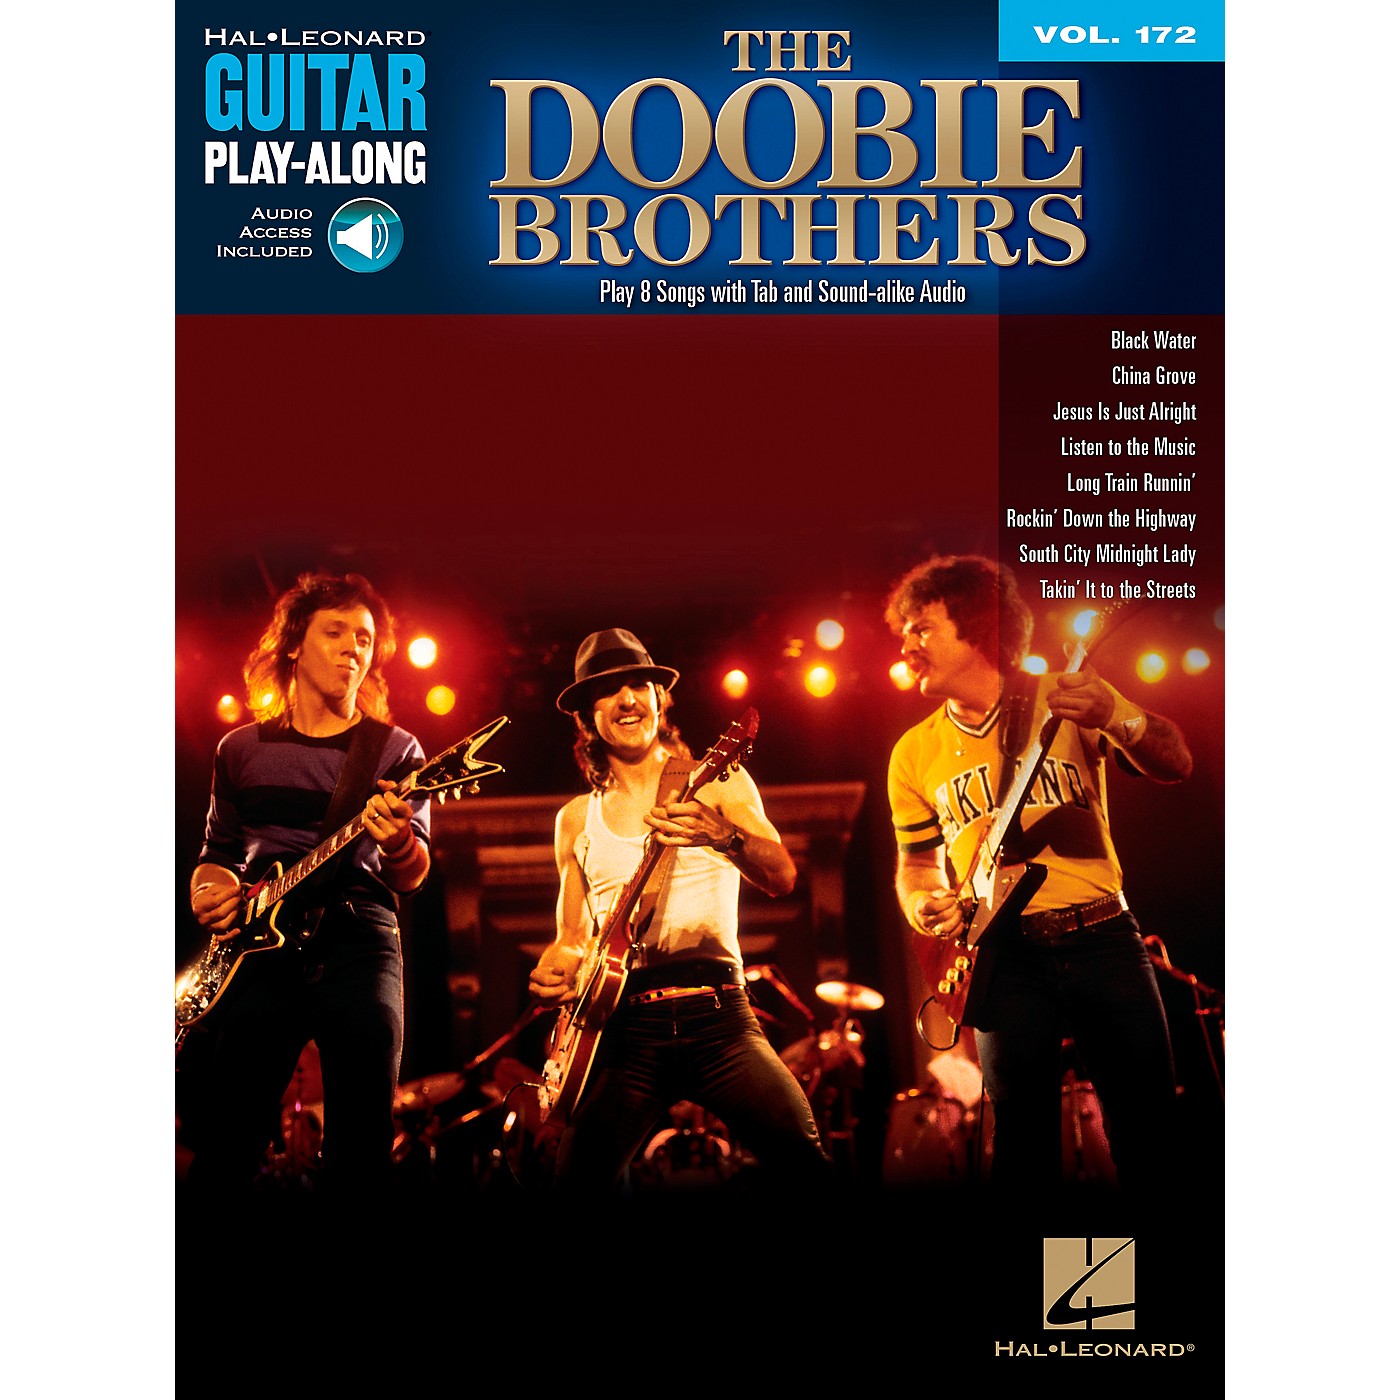 The Doobie brothers. Guitar brothers